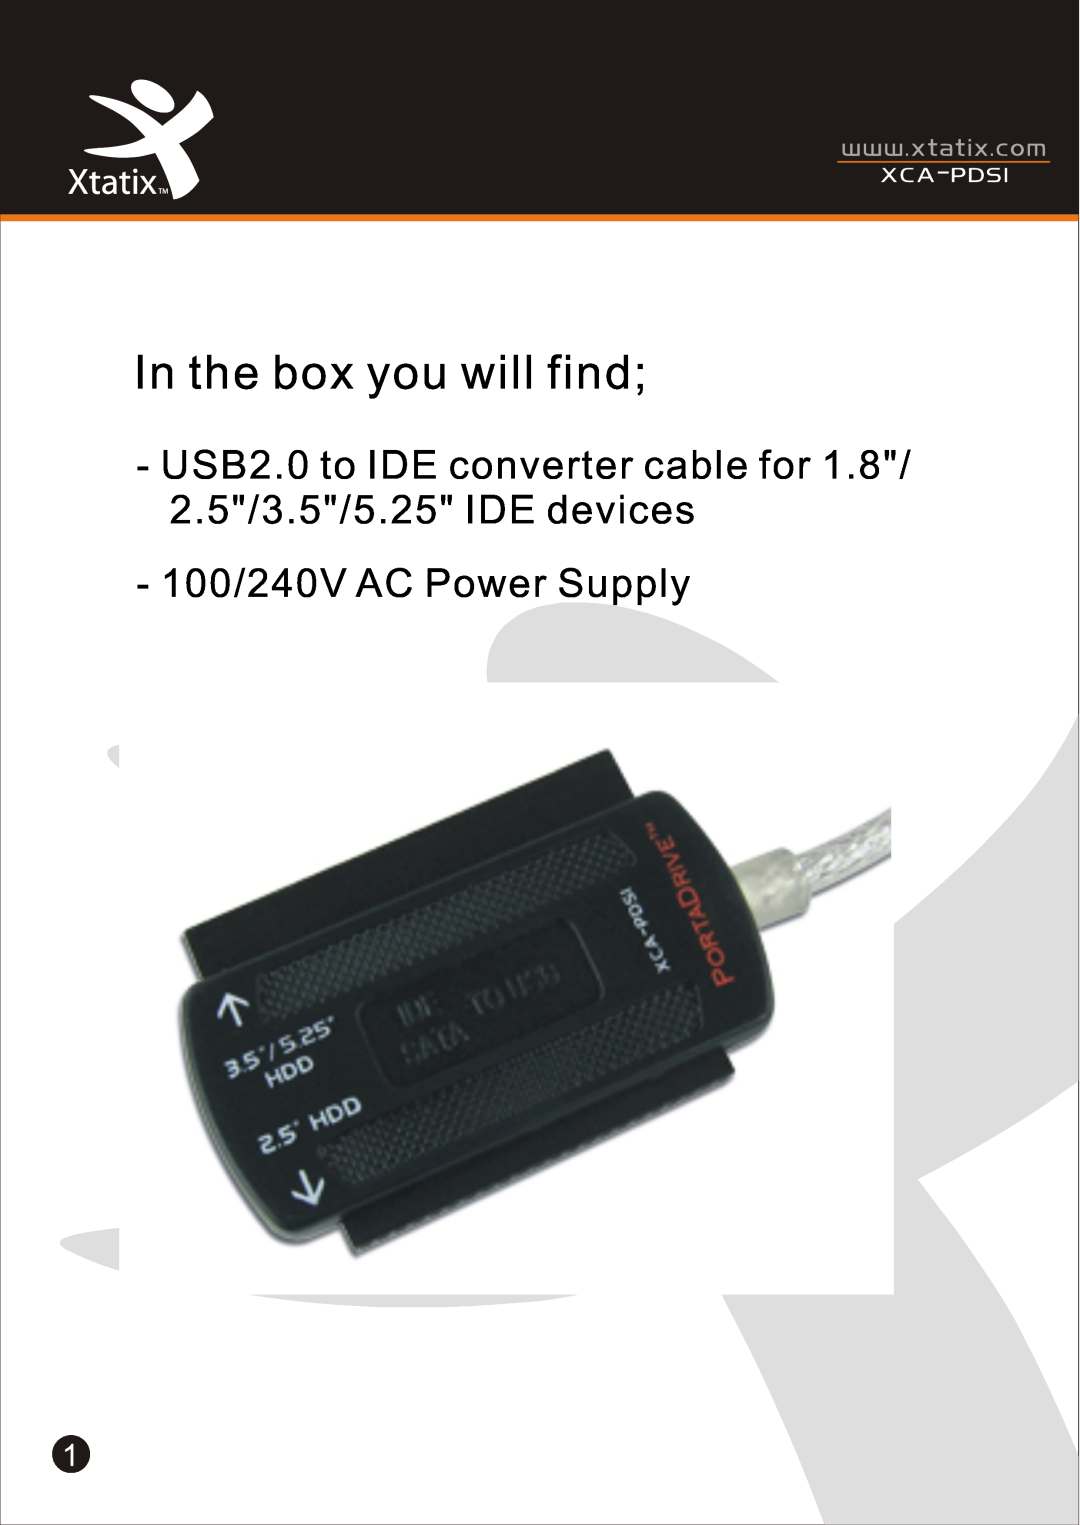 Xtatix XCA-PDSI In the box you will find, USB2.0 to IDE converter cable for, 2.5/3.5/5.25 IDE devices, Xca - Pdsi 